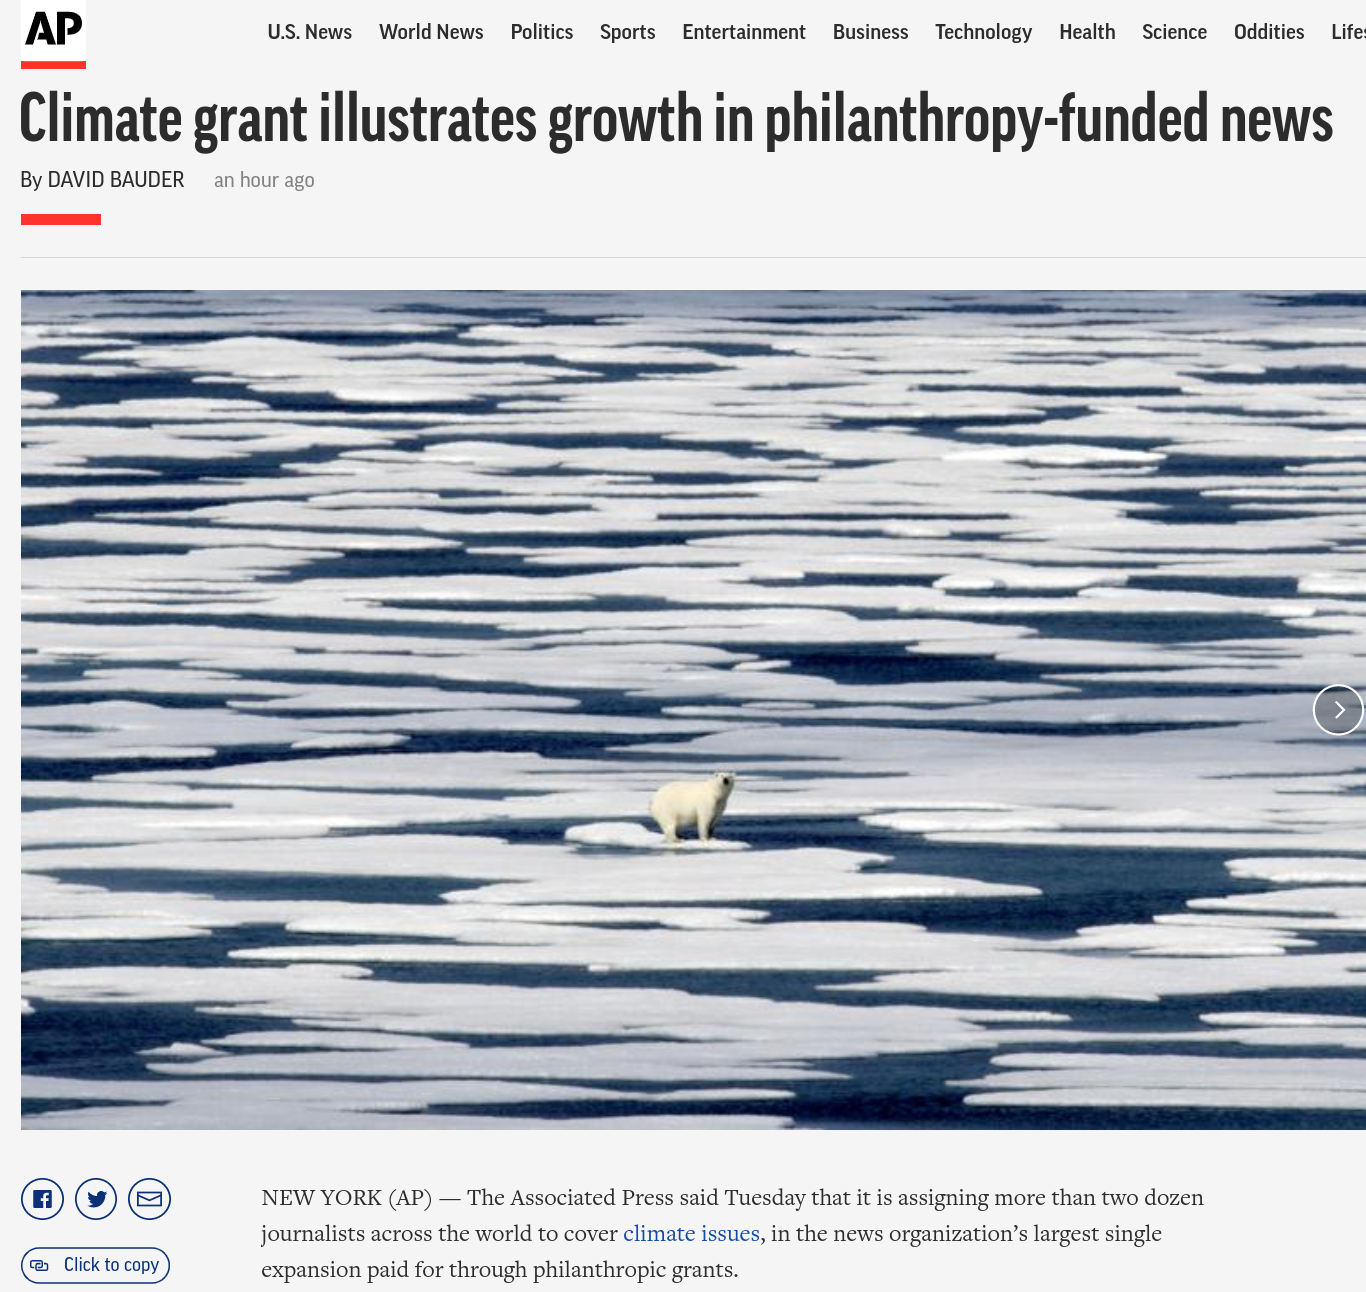 Paid press releases now officially the news: AP announces ‘largest single expansion’ of climate reporting ‘paid for through philanthropic grants’ of $8 million